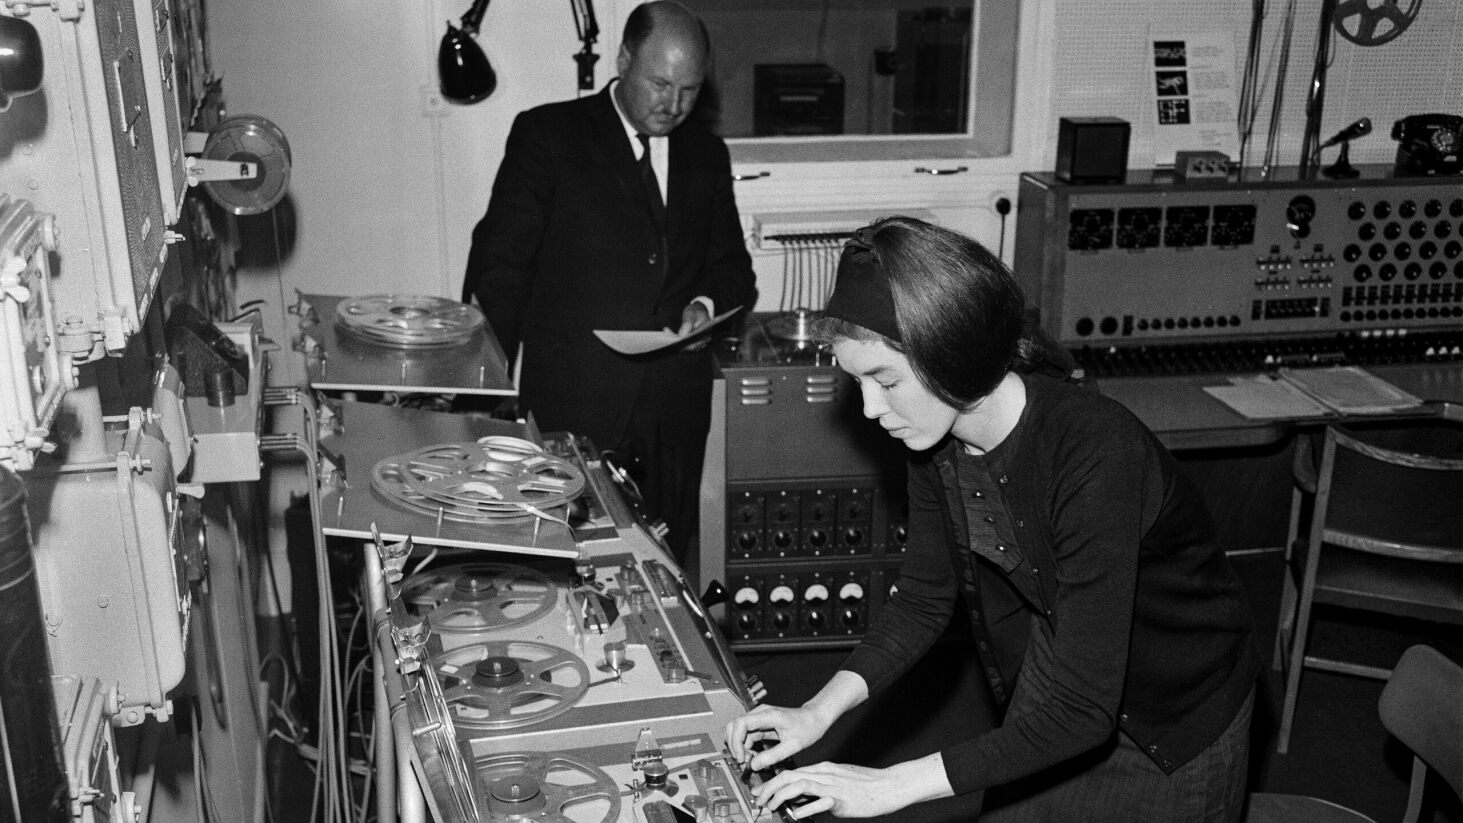 Delia Derbyshire who pioneered and produced the sound of Doctor Who. ©BBCArchives